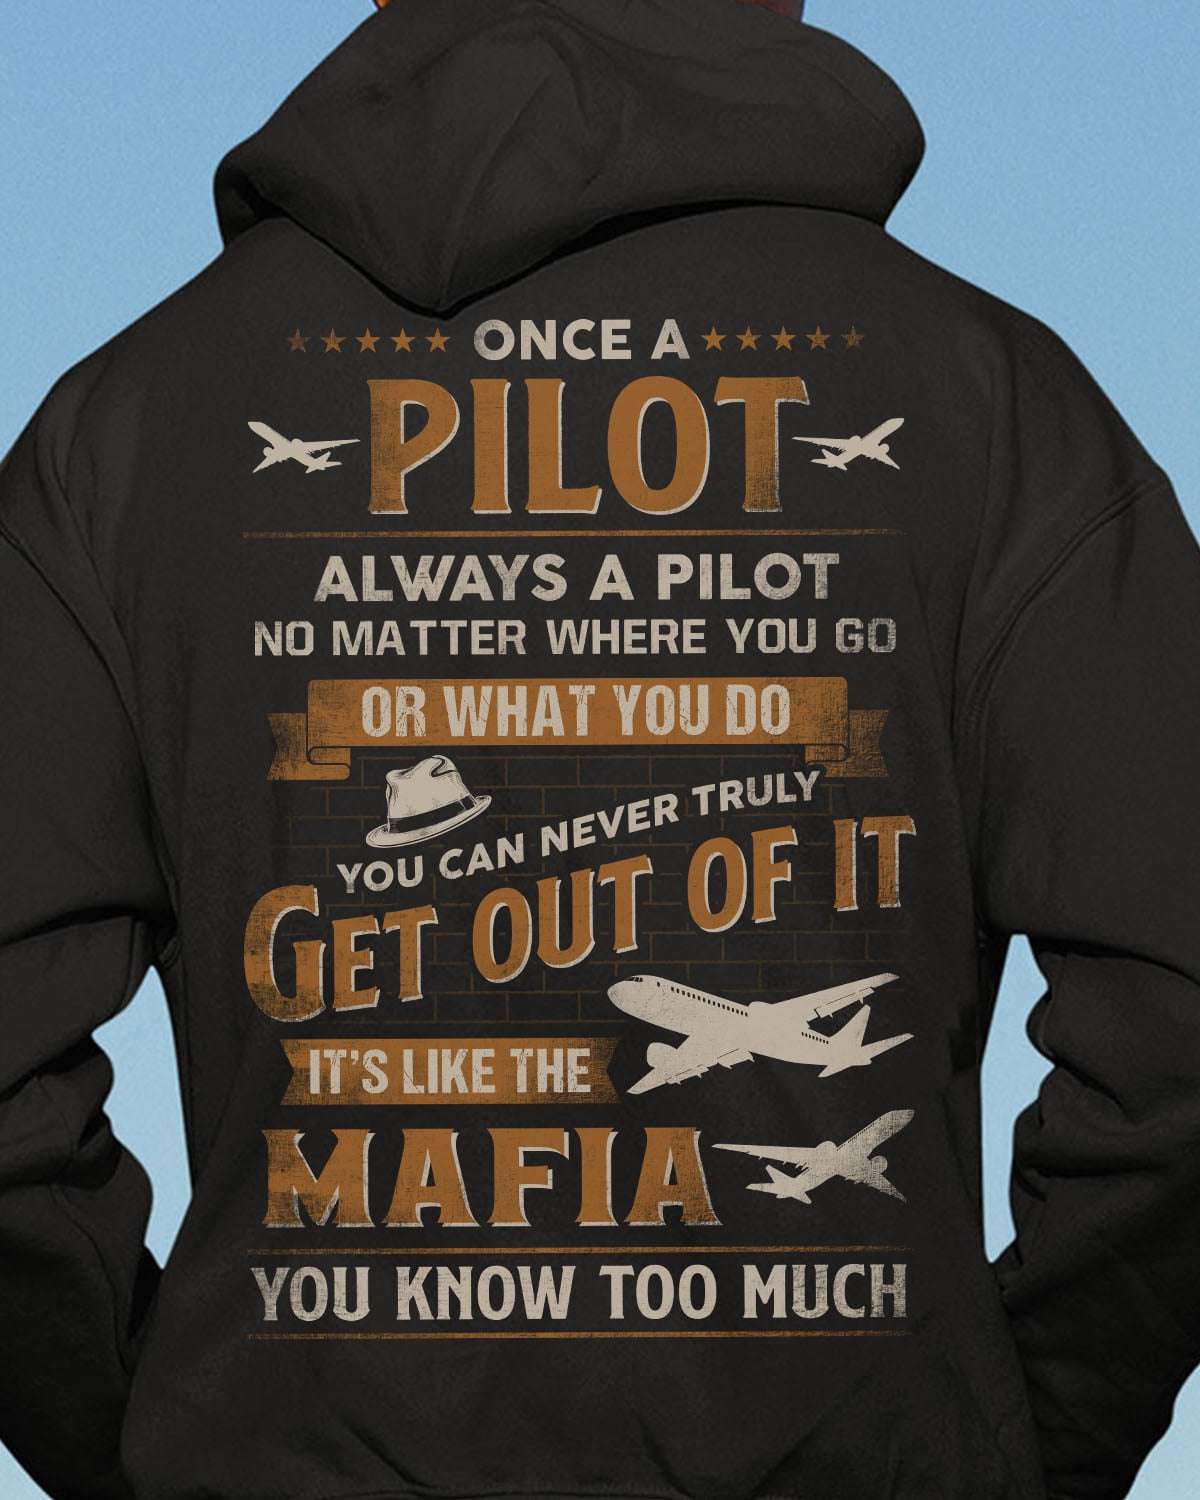 Once a pilot, always a pilot - No matter where you go or what you do